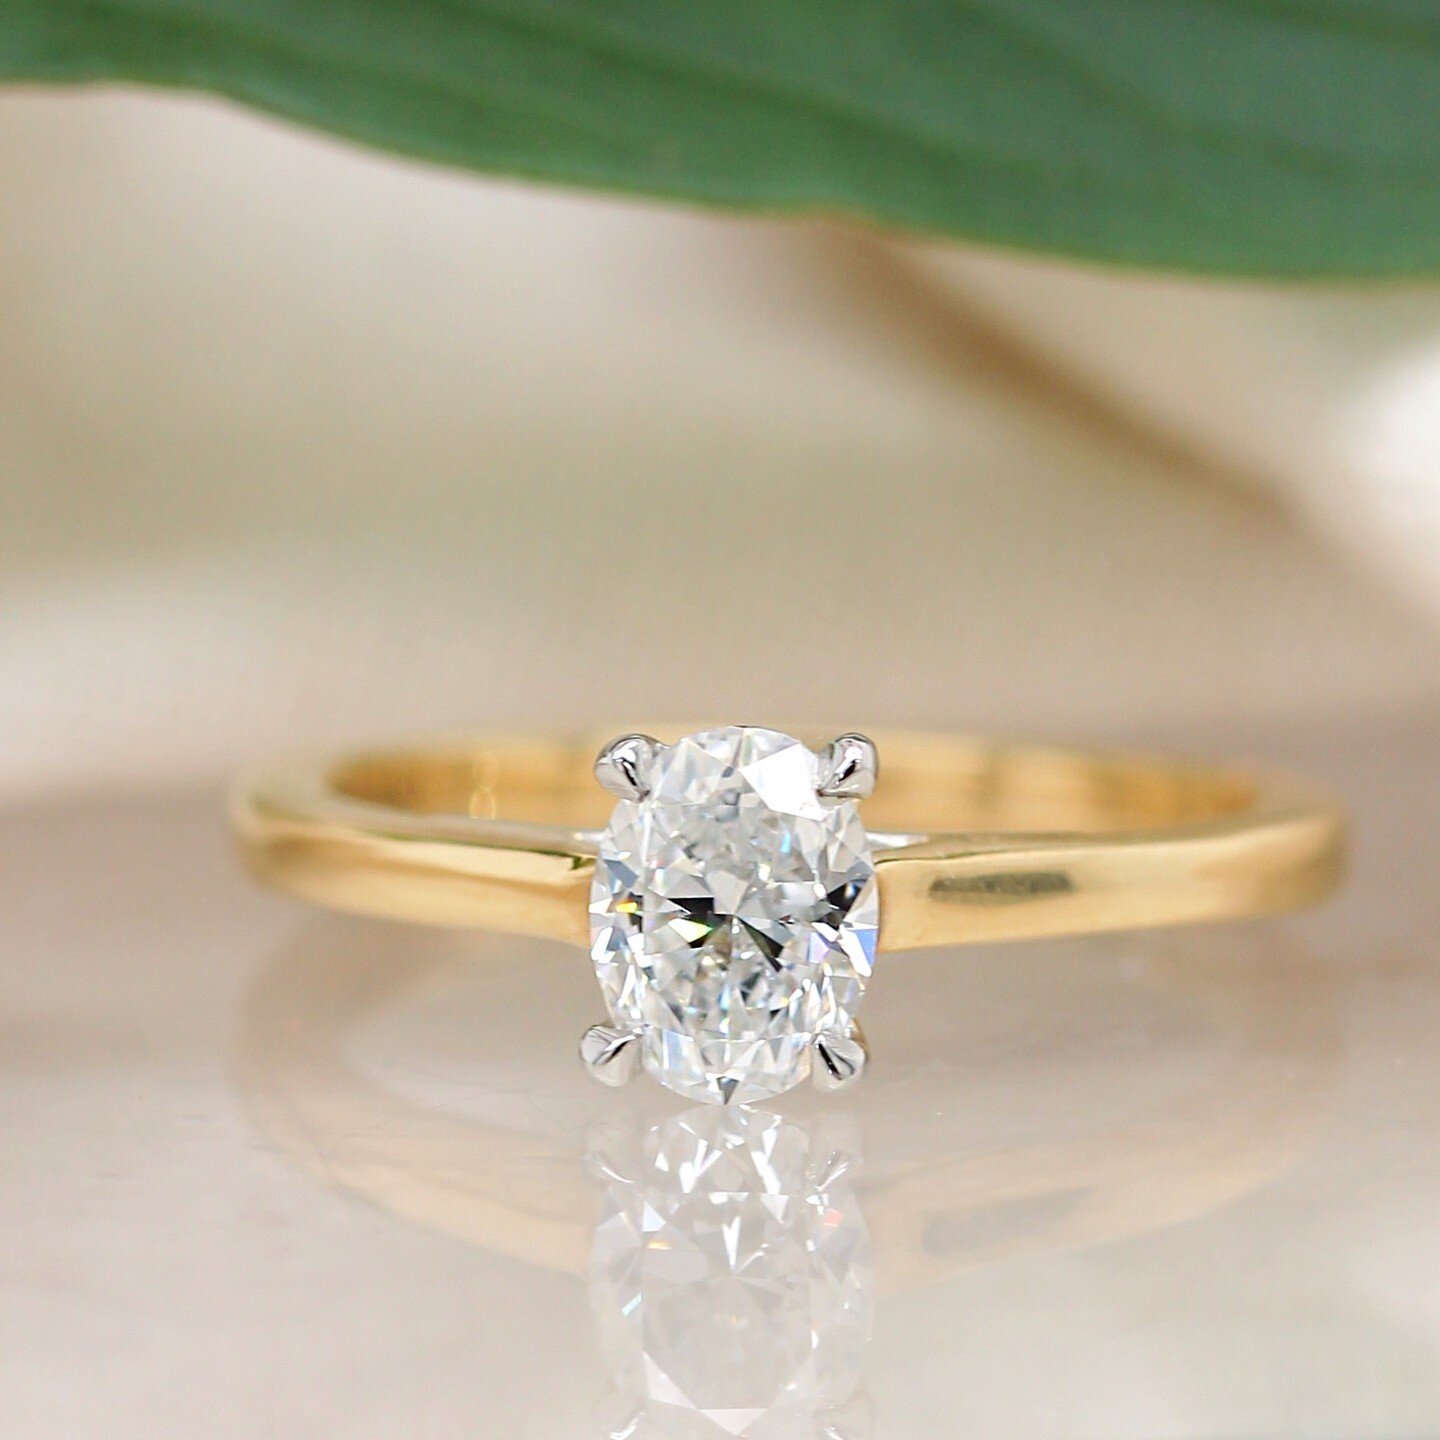 Warm gold adds a timeless touch of colour to your solitaire engagement ring. Tastefully paired together with diamonds, a gold solitaire ring is understated yet commands attention for all the right reasons.⁠
.⁠
.⁠
.⁠
#diamondring #engagementrings #ova